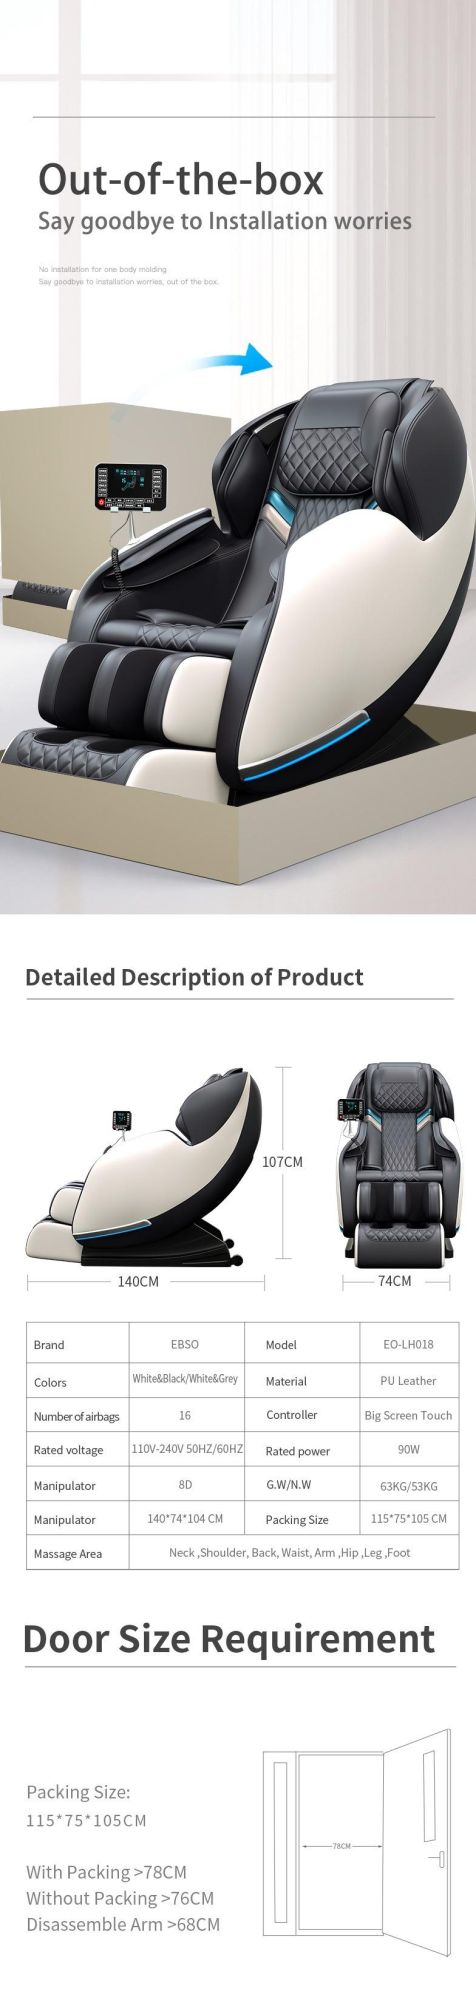 Full Body Airbags Vibration Massage Chair for Living Room Use